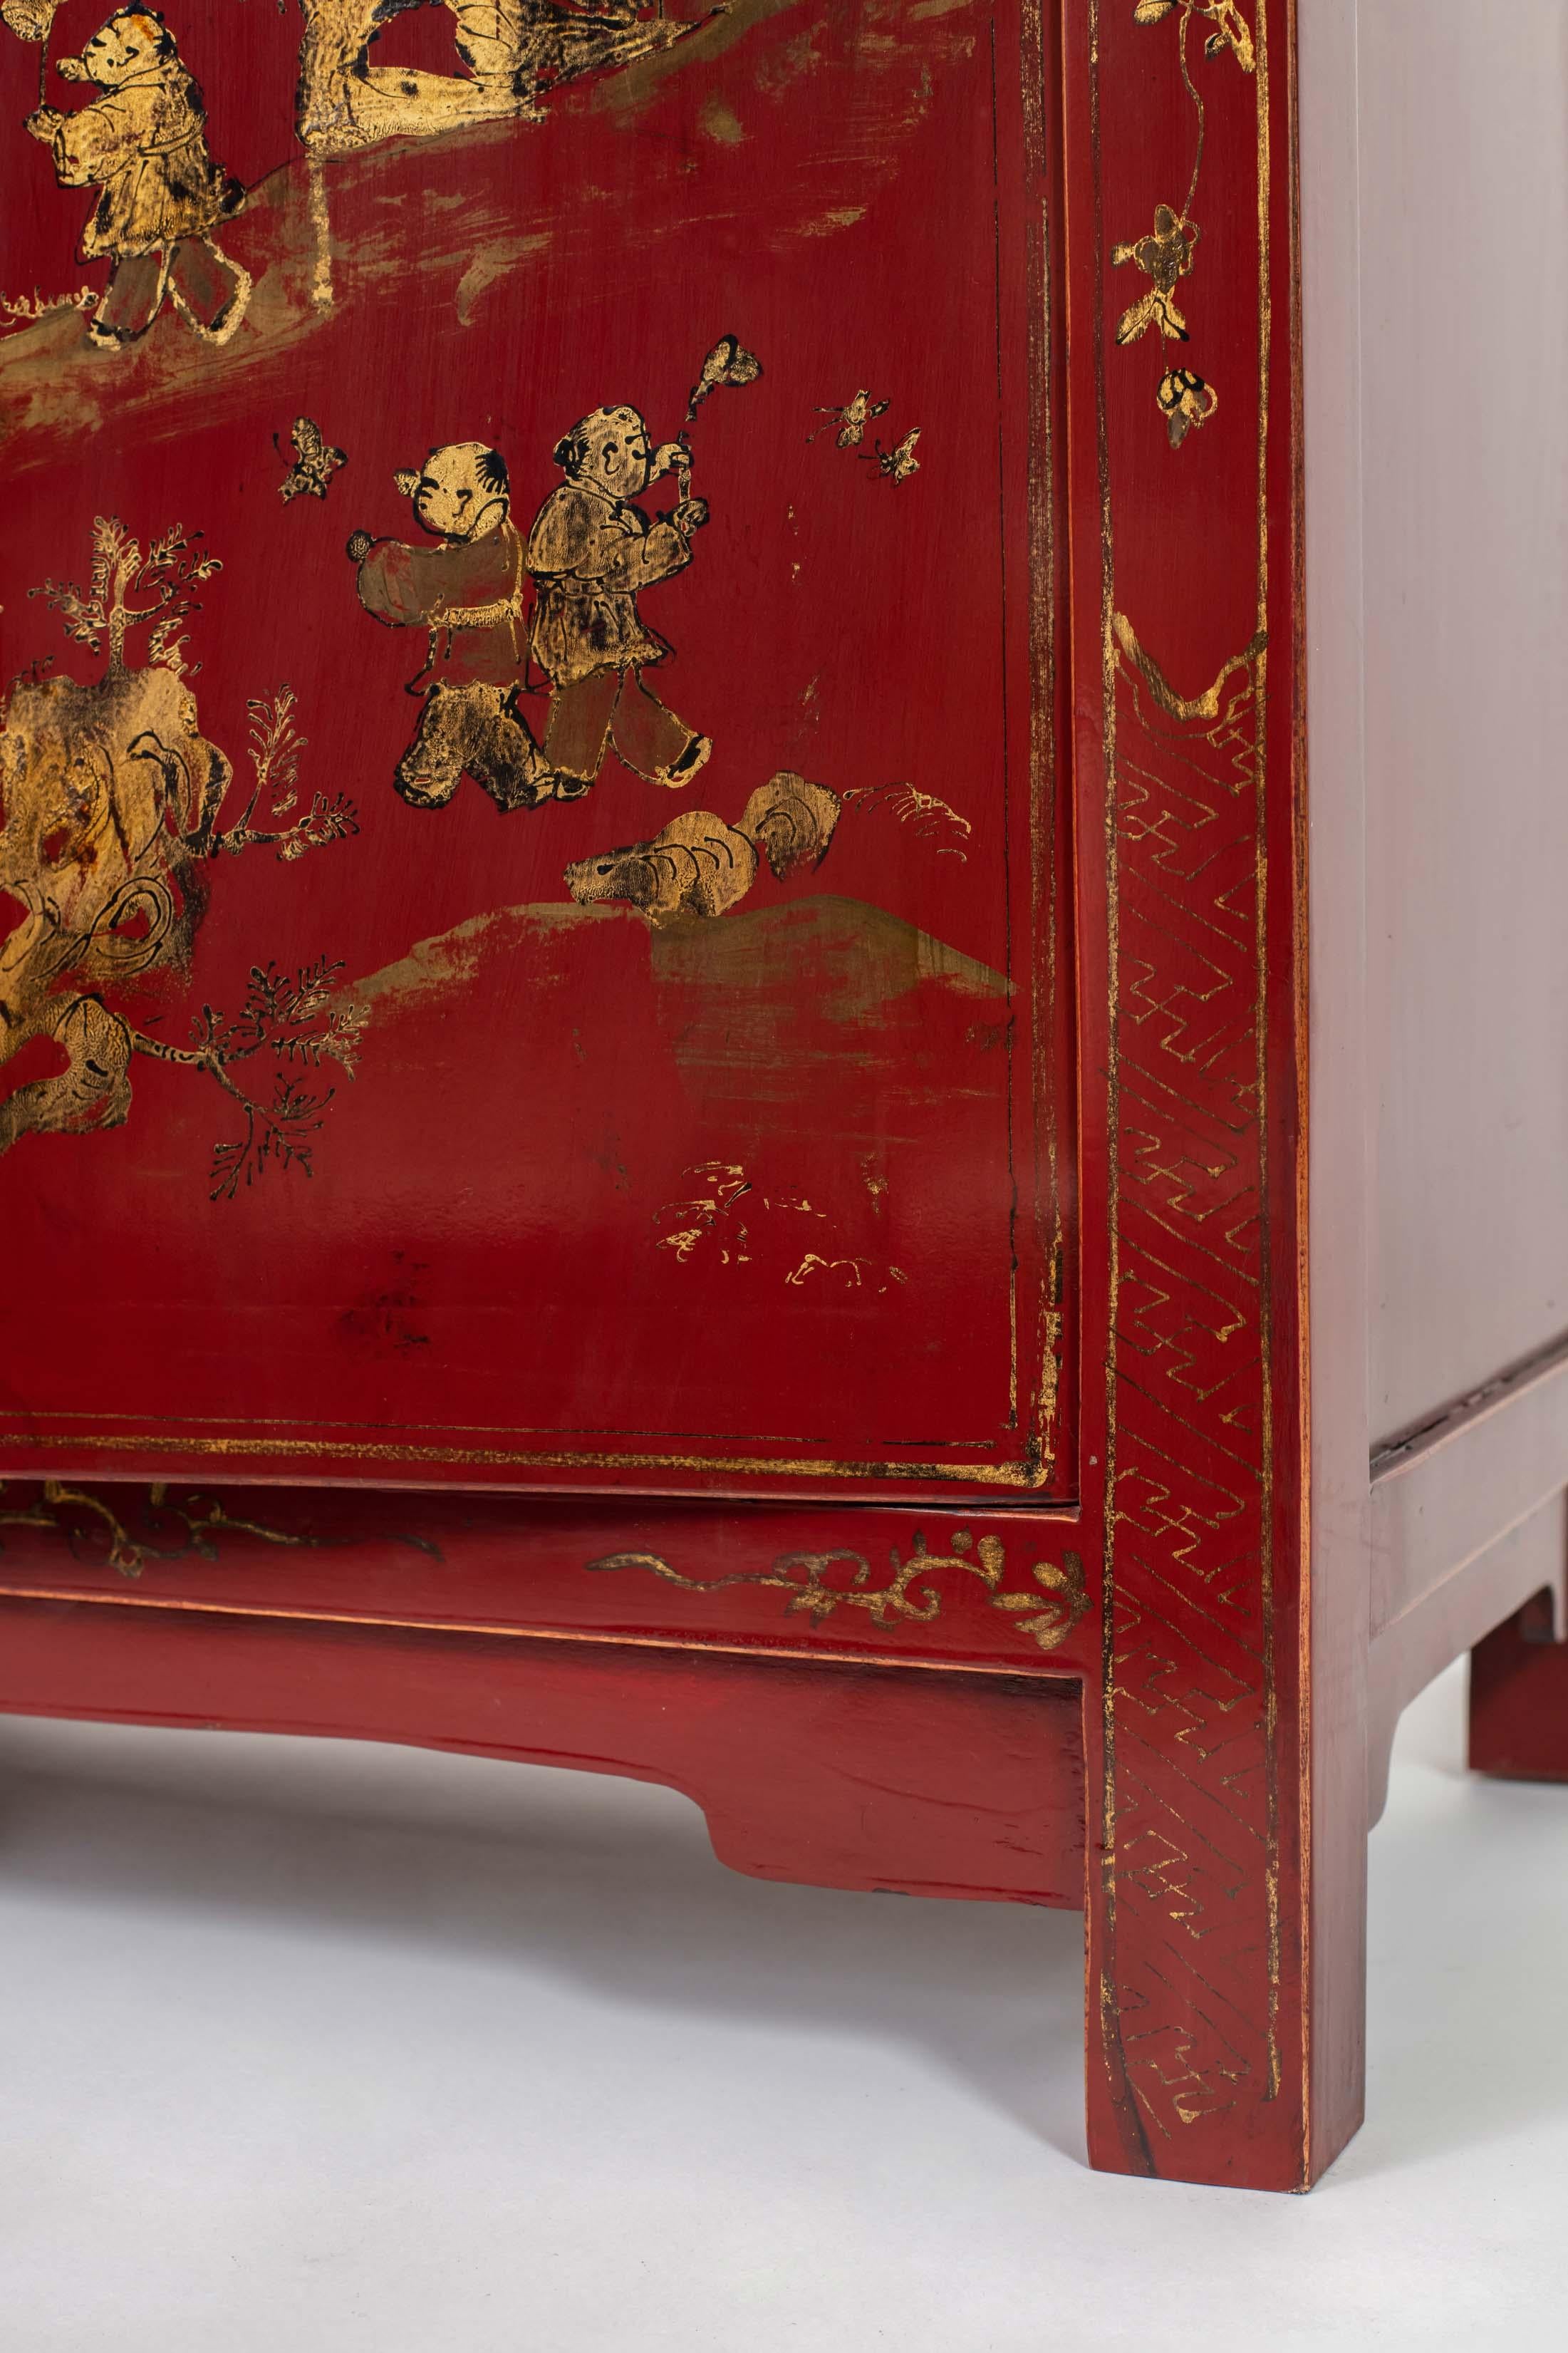 Pair of Small Red Lacquer Cabinets Handpainted with Gilt Children in Courtyard 5